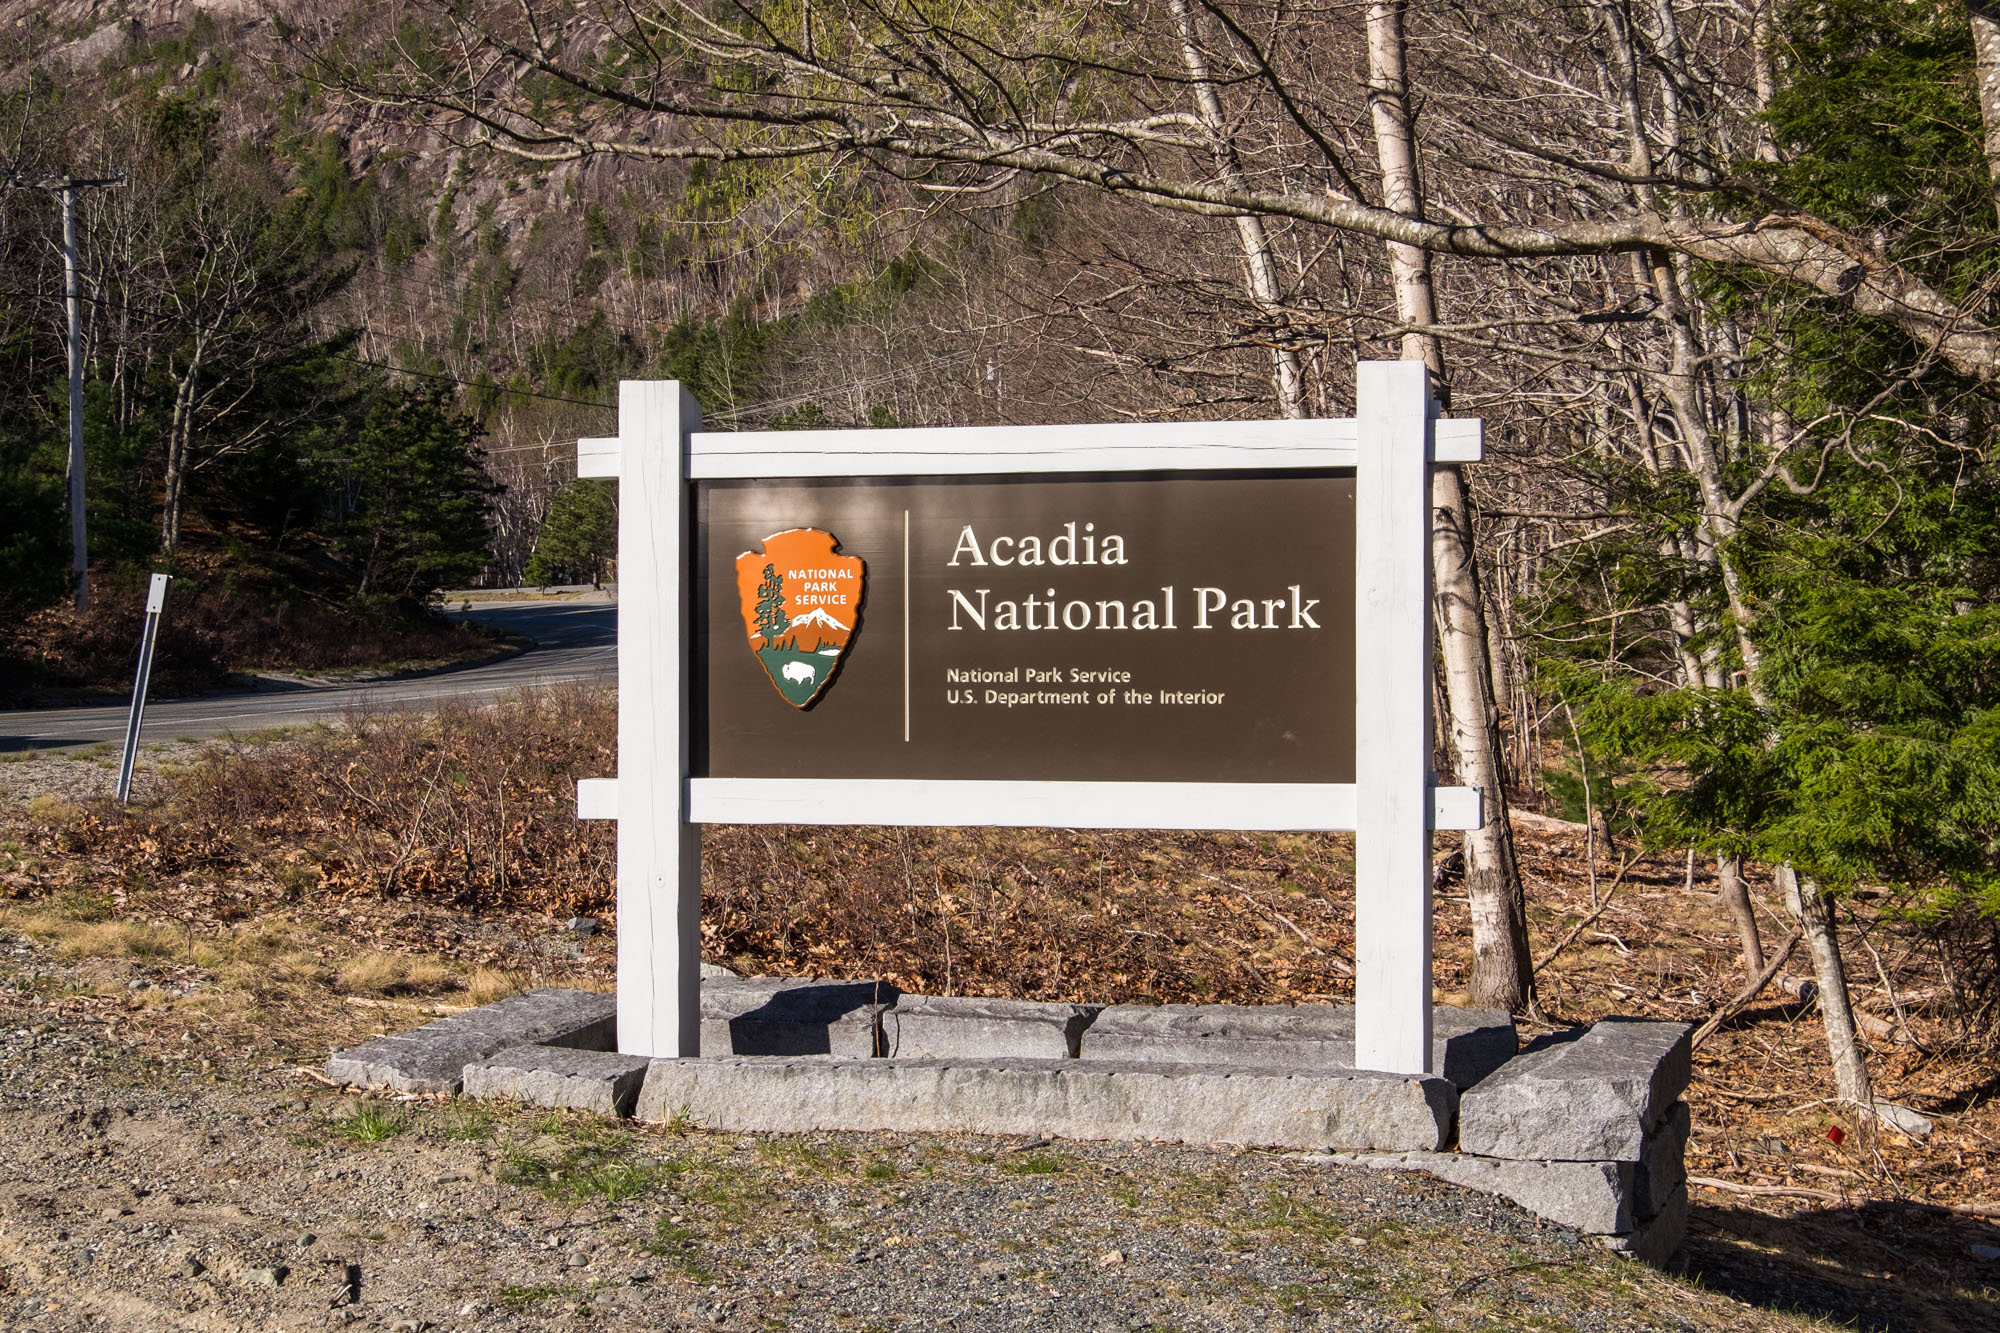 It's only 27 miles, but you could spend 1/2 the day driving the loop if you stop and enjoy the views. Acadia National Park The Greatest American Road Trip